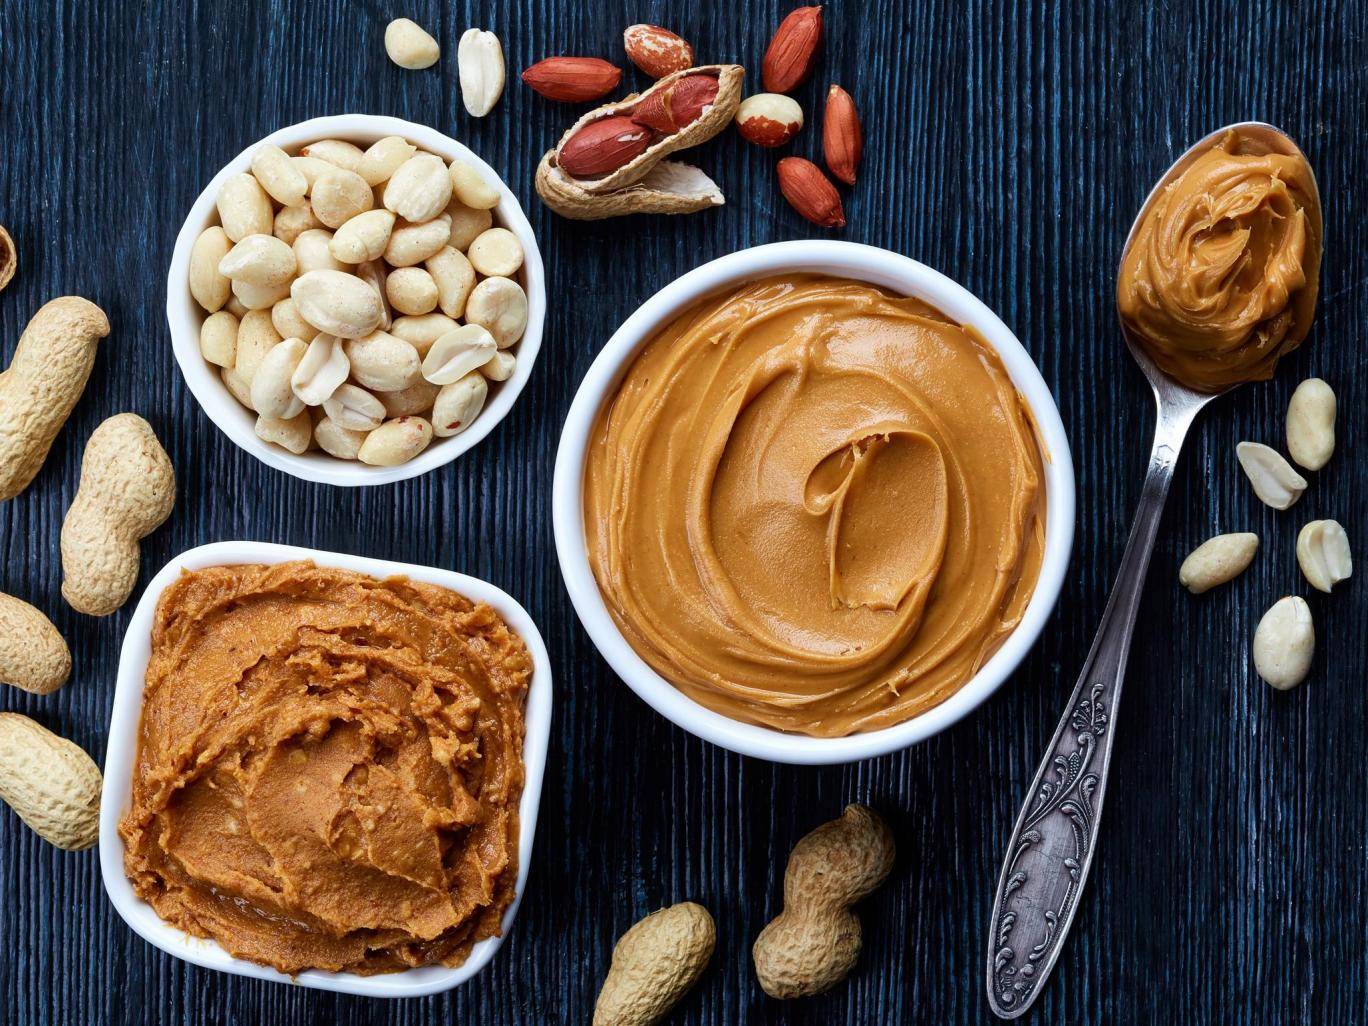 Natural nut butters